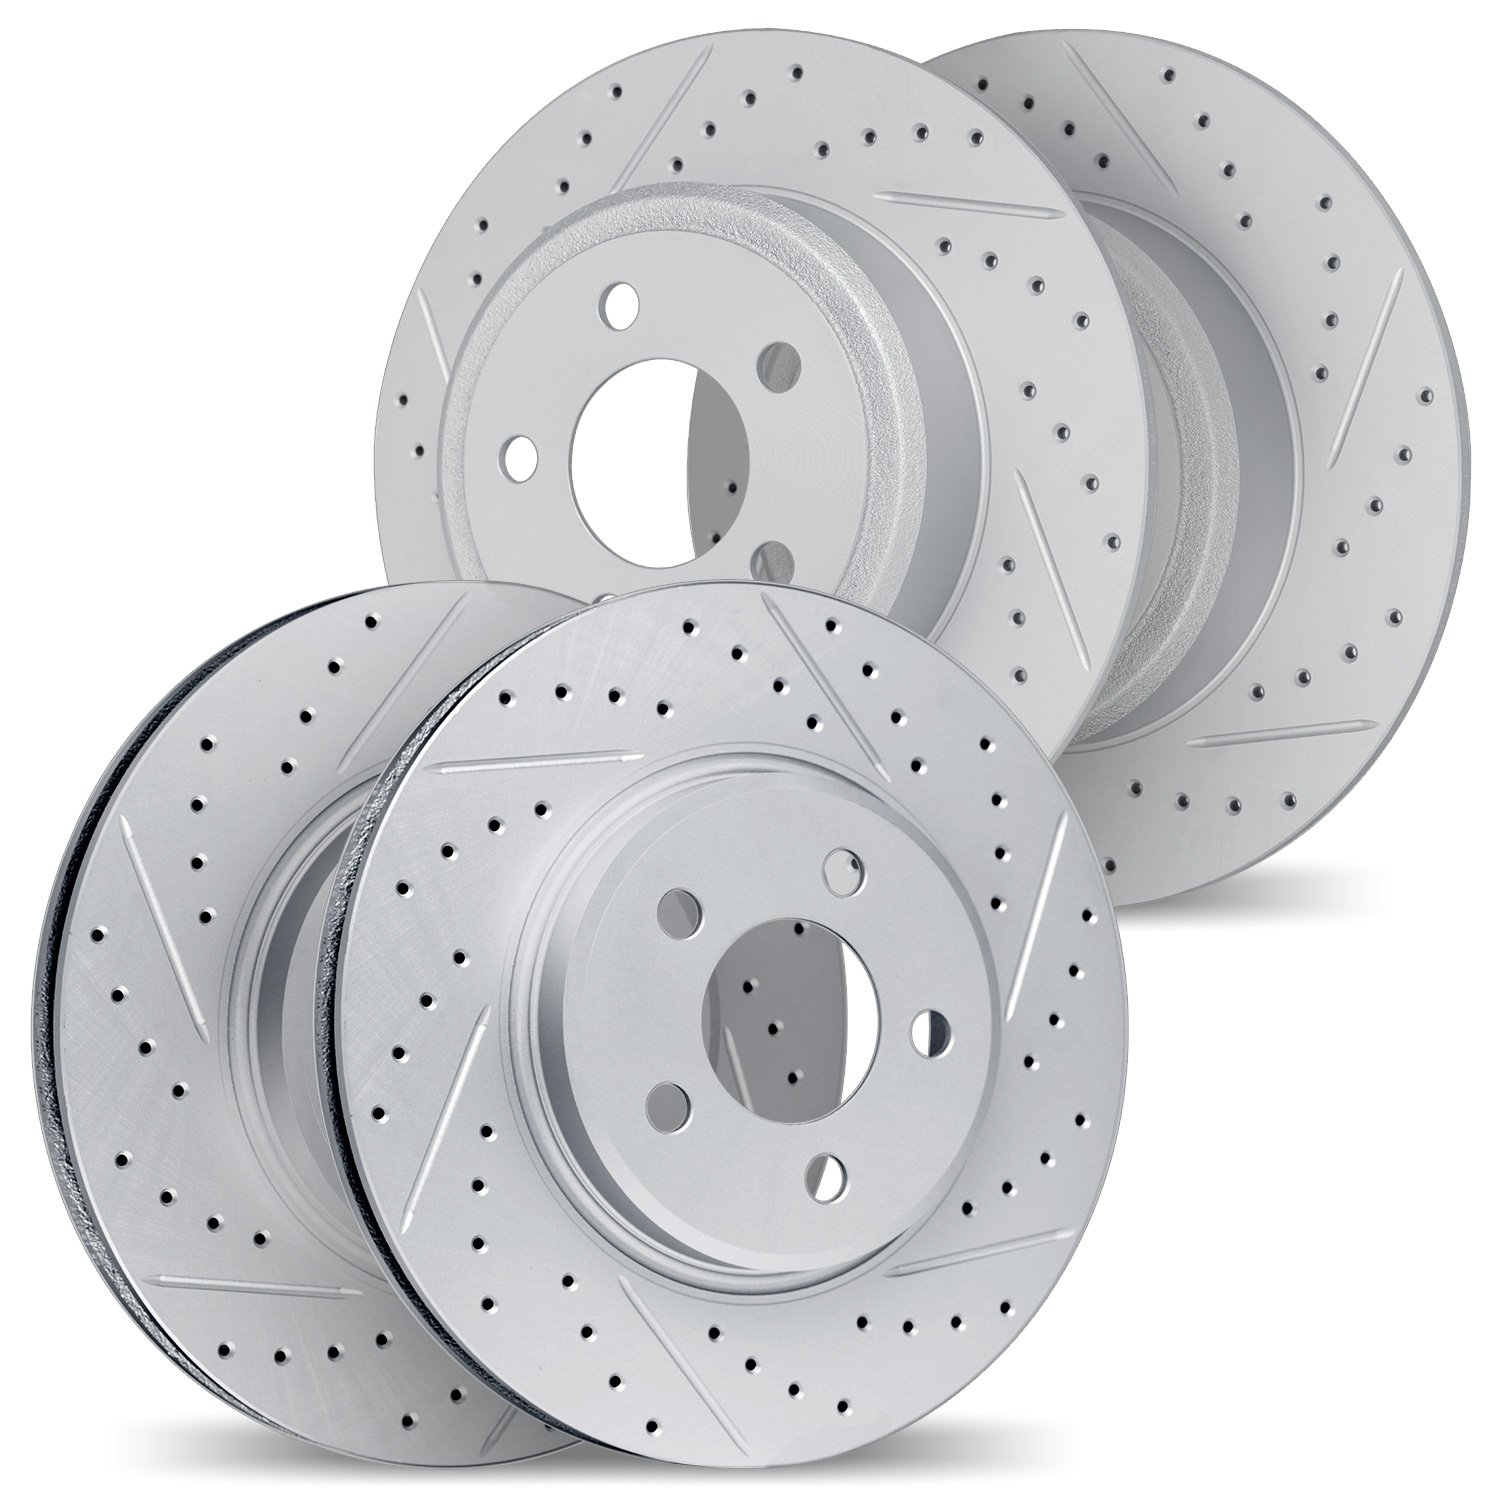 2004-58009 Geoperformance Drilled/Slotted Brake Rotors, 2014-2020 Acura/Honda, Position: Front and Rear